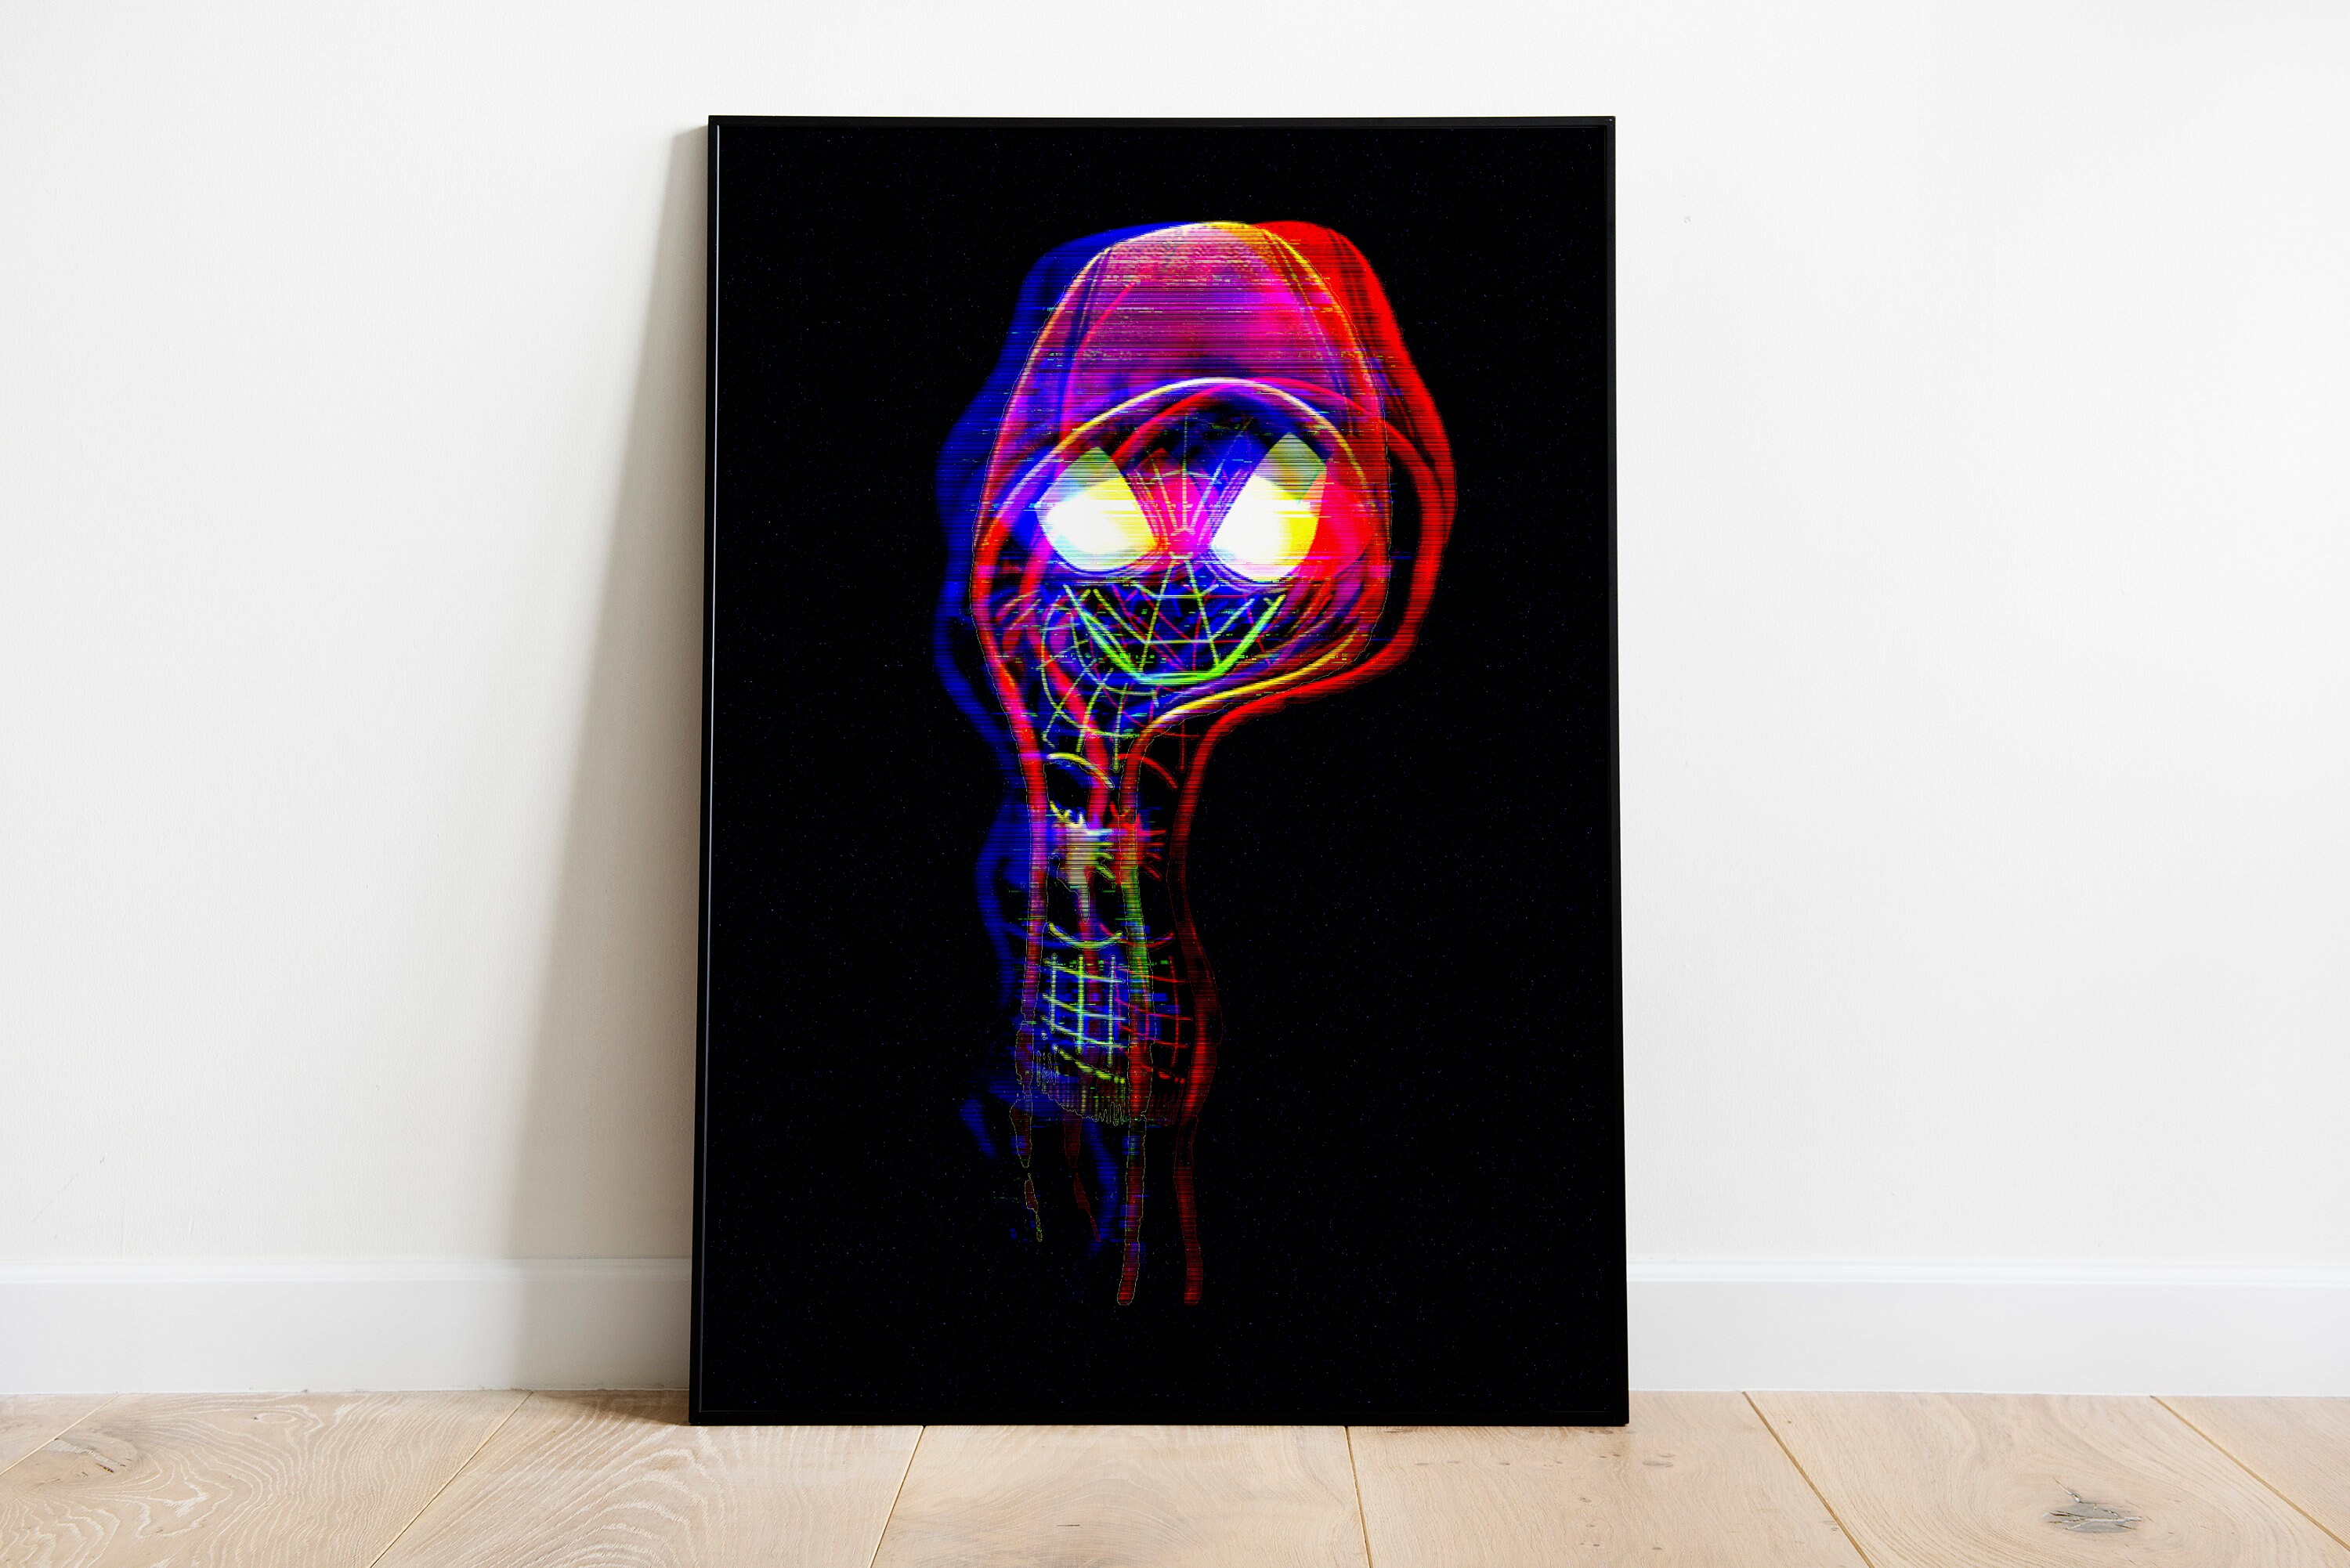 MILES MORALES POSTER - Spider-Man Poster - Into the Spider-Verse Poster - Marvel Poster - Wall Art - Digital Art - Glitch Art - Printed Art